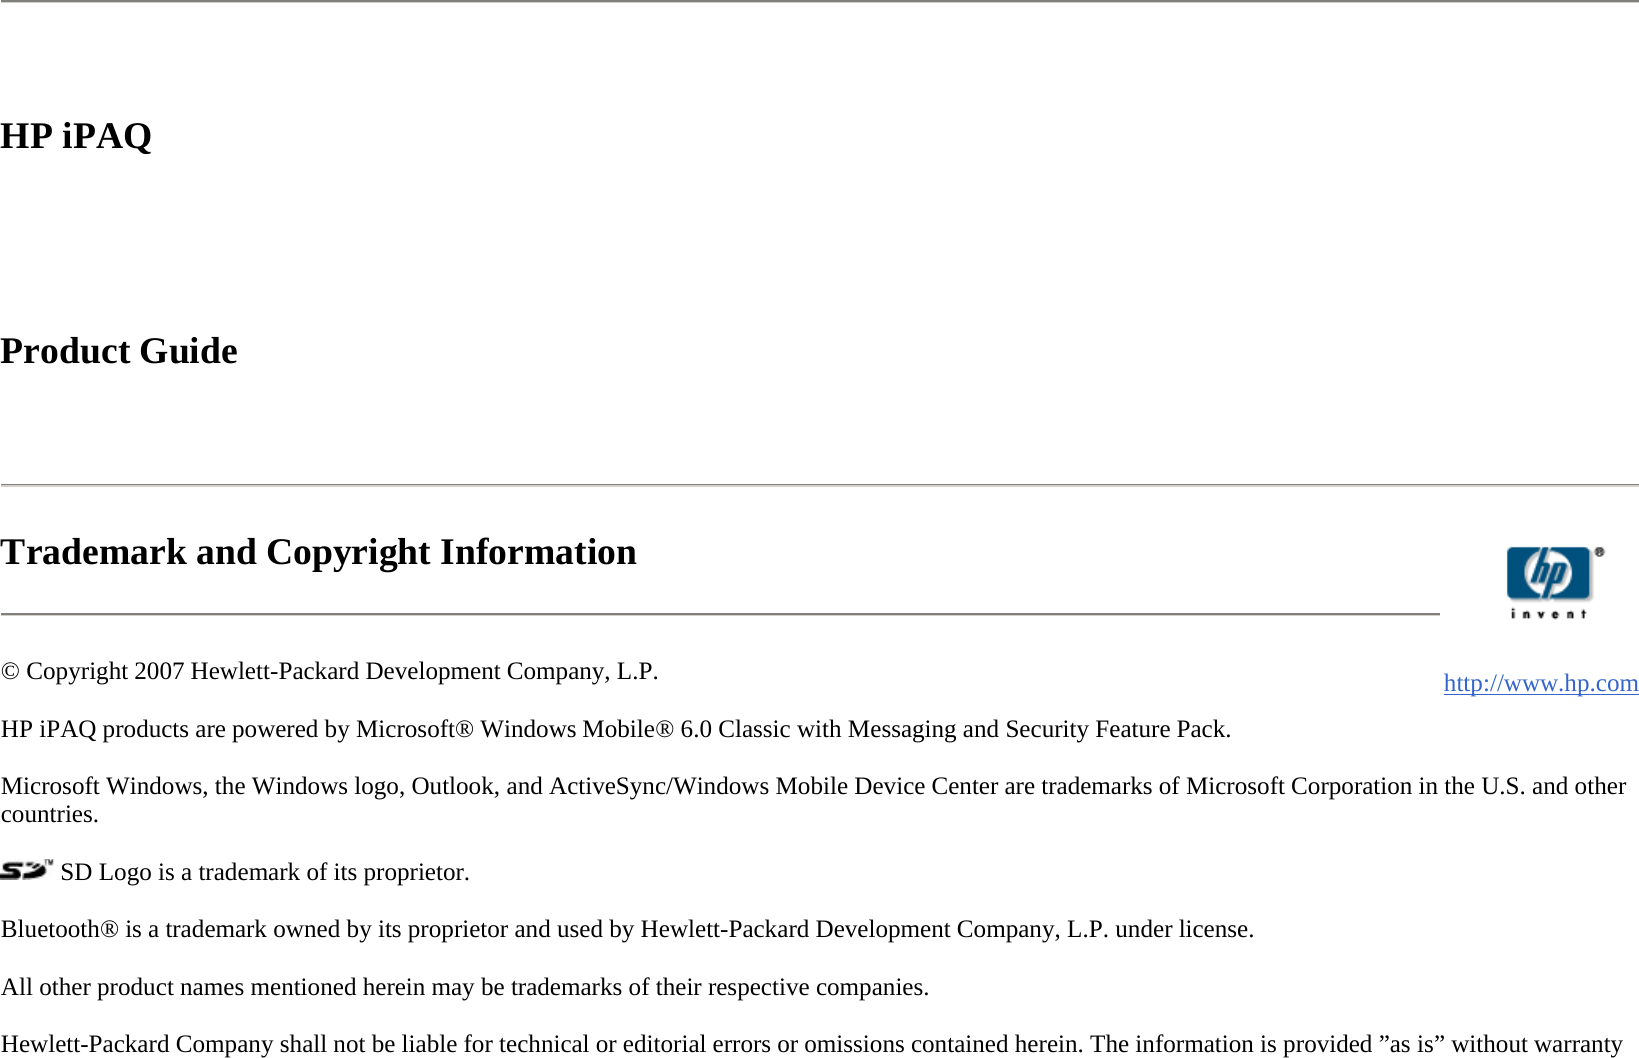   HP iPAQ     Product Guide    Trademark and Copyright Information  © Copyright 2007 Hewlett-Packard Development Company, L.P.  HP iPAQ products are powered by Microsoft® Windows Mobile® 6.0 Classic with Messaging and Security Feature Pack.  Microsoft Windows, the Windows logo, Outlook, and ActiveSync/Windows Mobile Device Center are trademarks of Microsoft Corporation in the U.S. and other countries.   SD Logo is a trademark of its proprietor.  Bluetooth® is a trademark owned by its proprietor and used by Hewlett-Packard Development Company, L.P. under license.  All other product names mentioned herein may be trademarks of their respective companies.  Hewlett-Packard Company shall not be liable for technical or editorial errors or omissions contained herein. The information is provided ”as is” without warranty    http://www.hp.com